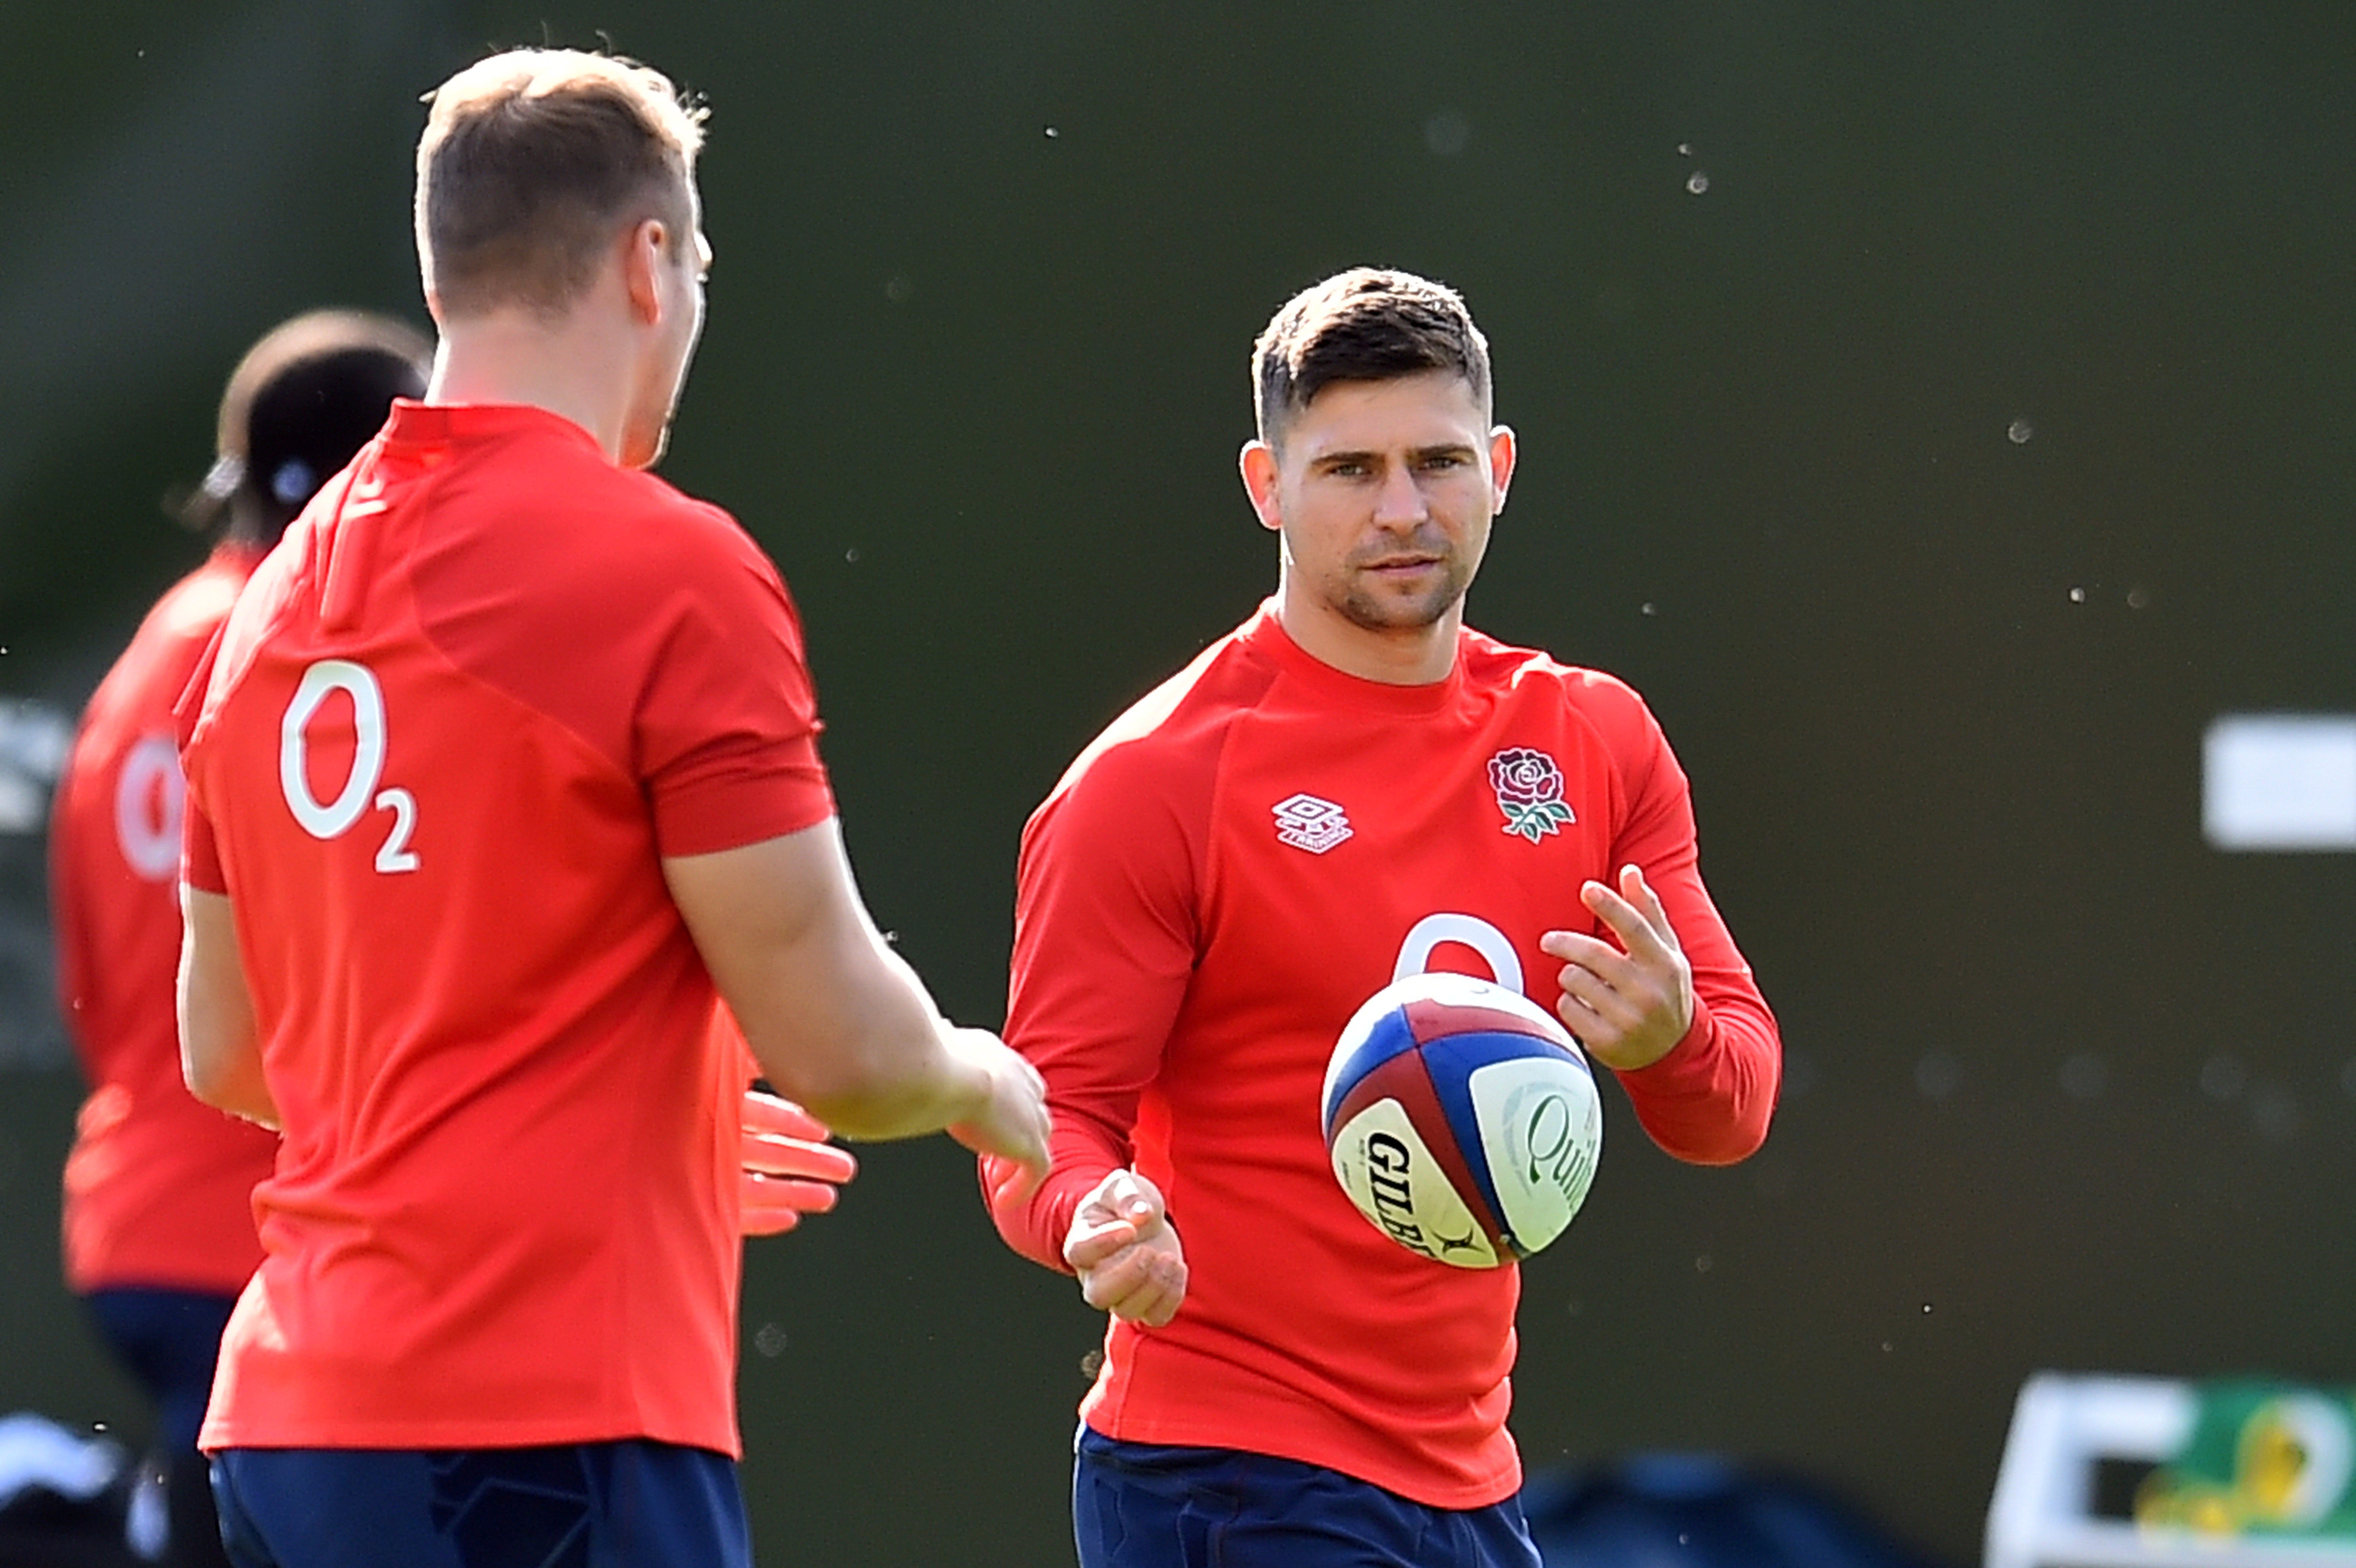 Ben Youngs will win his 100th cap for England in the Six Nations showdown against Italy